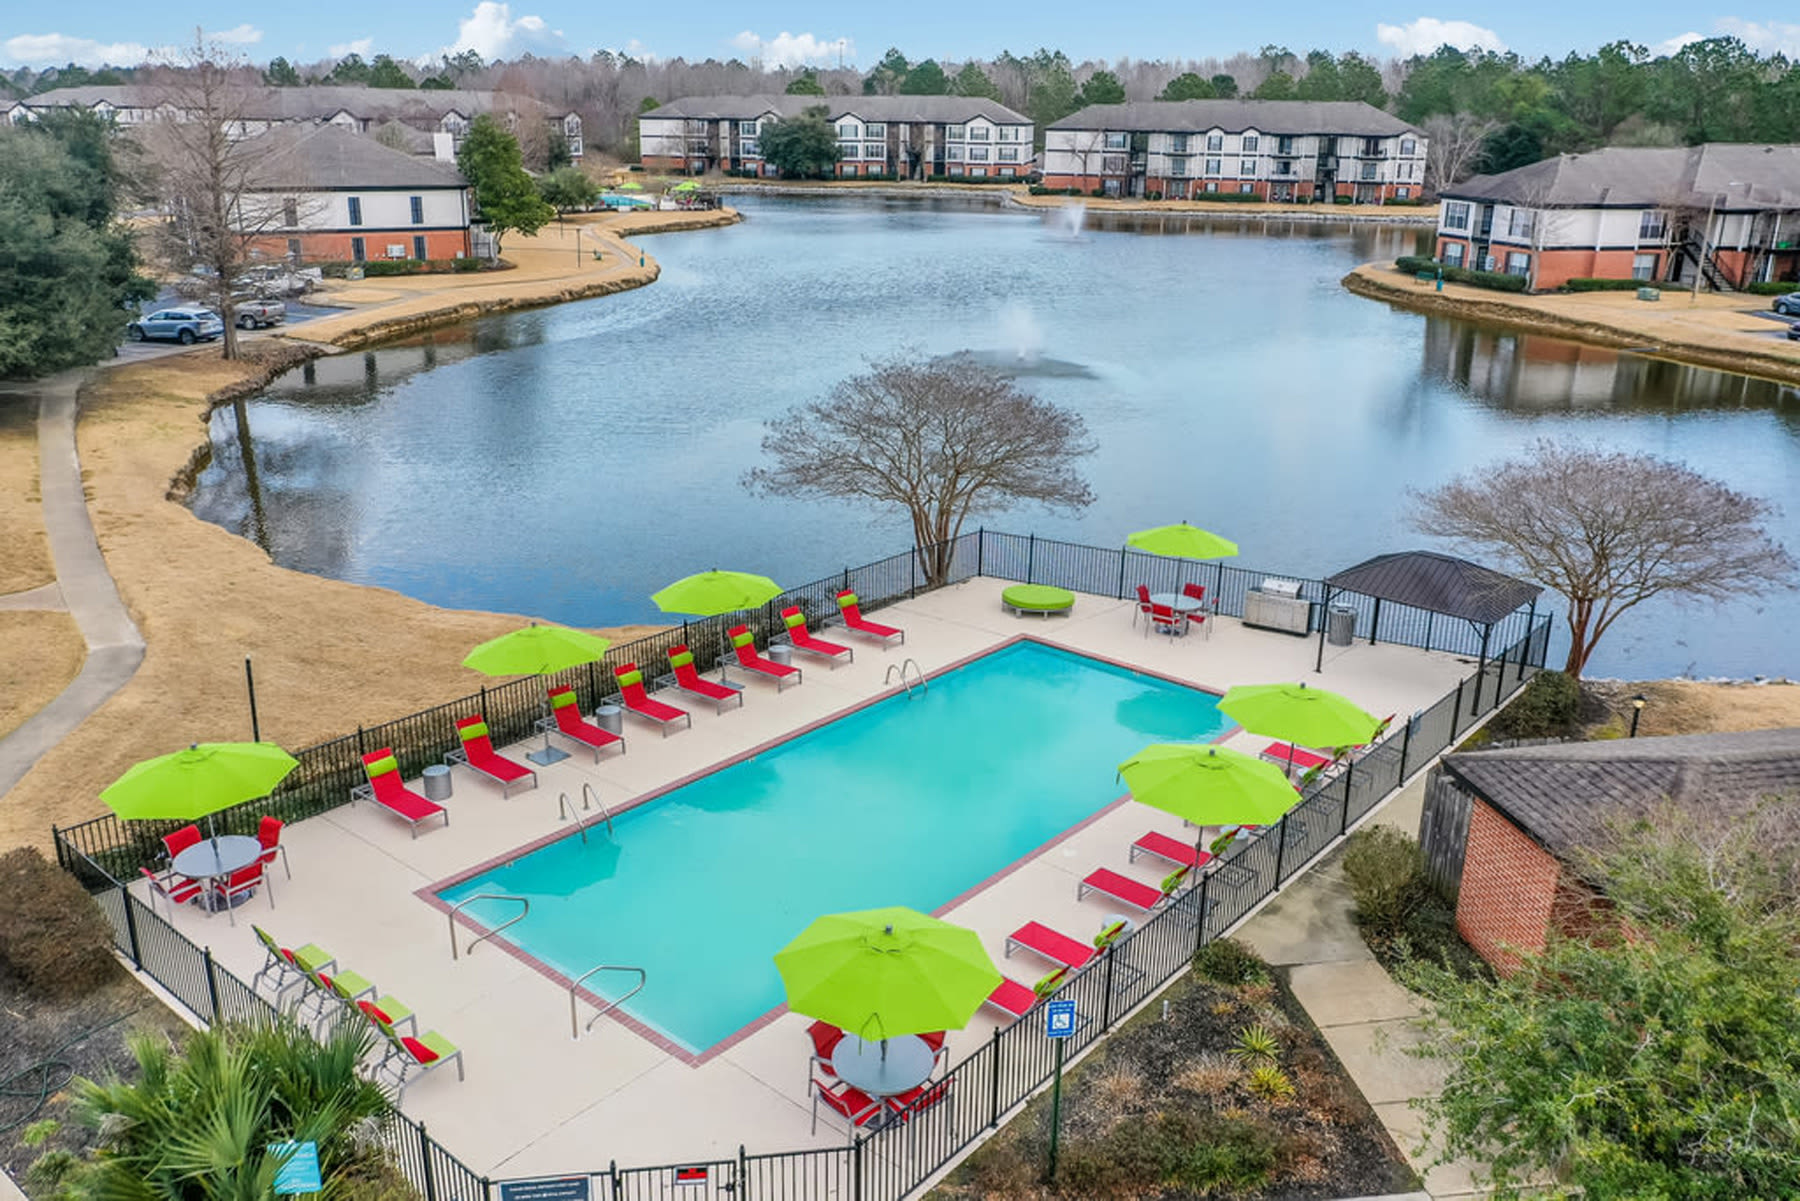 Newly updated pool at Windsor Lake in Brandon, Mississippi